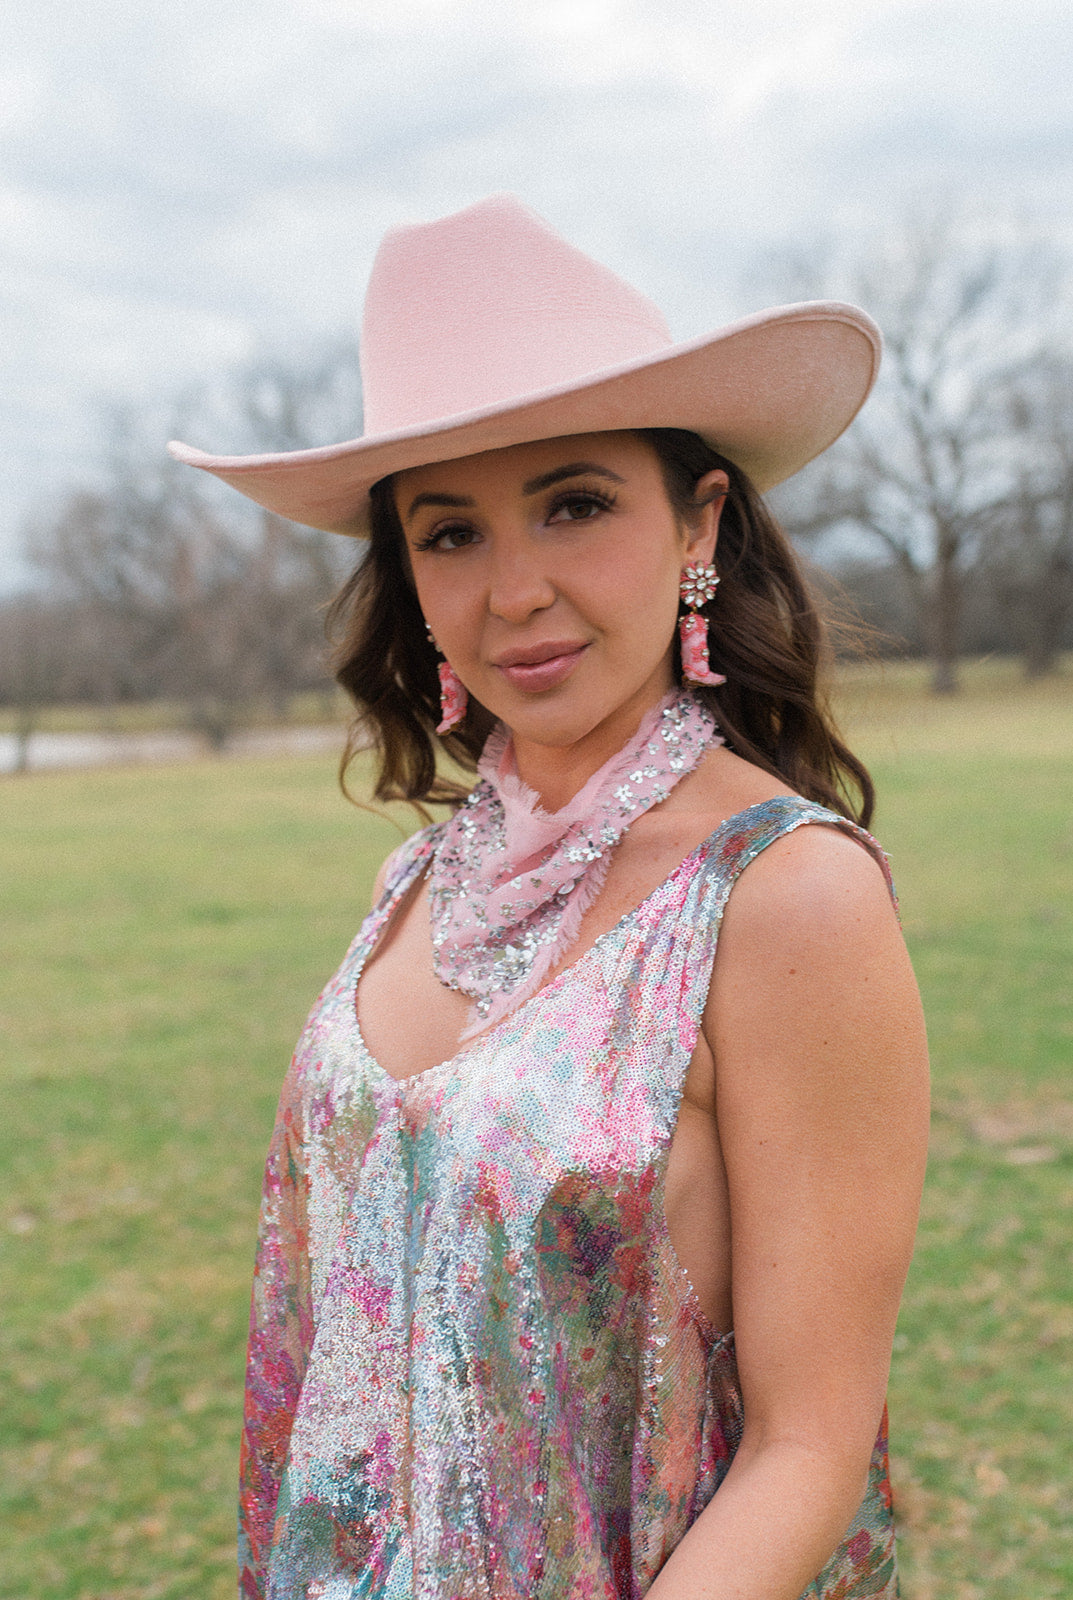 Exclusive Disco Cowgirl Drop Earrings- Blush Pink by Mignonne Gavigan